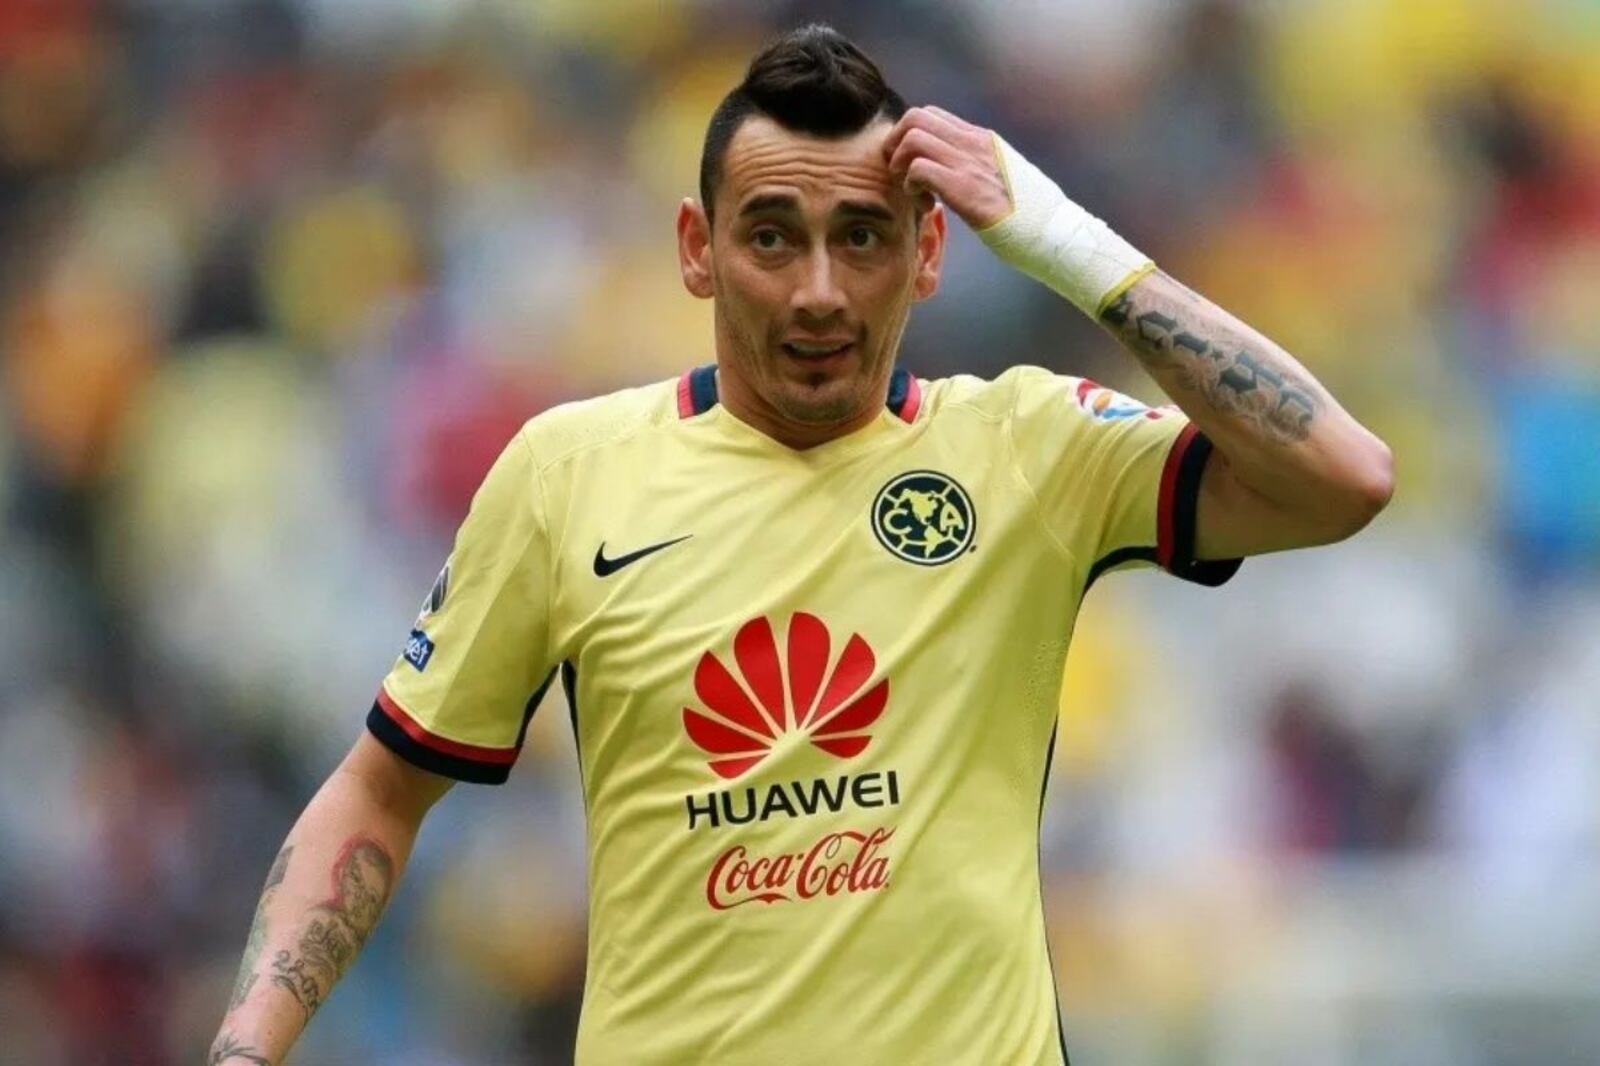 The gesture of Rubens Sambueza that excites the fans of Club América